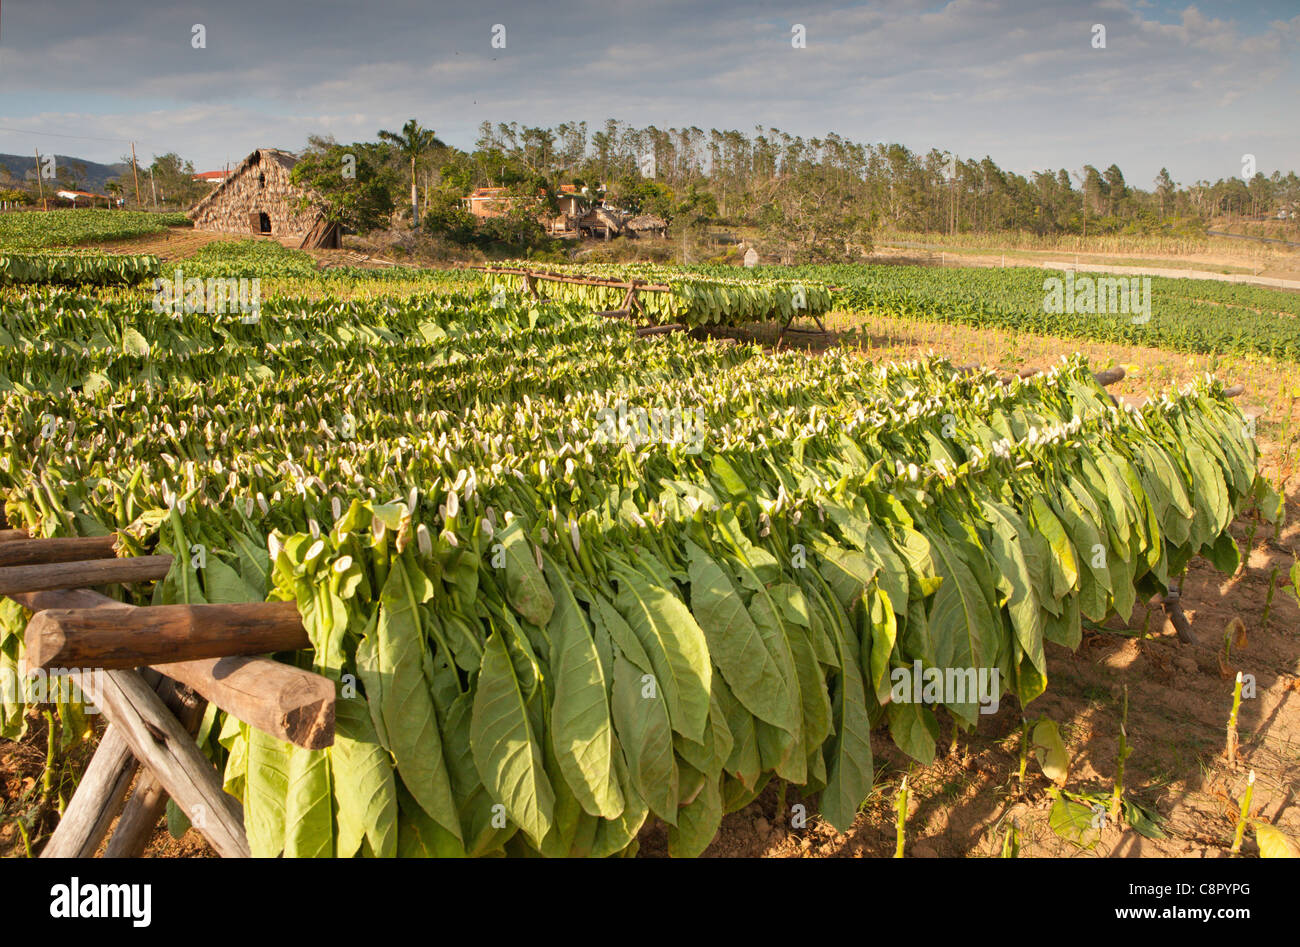 PINAR DEL RIO: VINALES VALLEY TOBACCO FARM WITH TOBACCO DRYING ON RACK Stock Photo